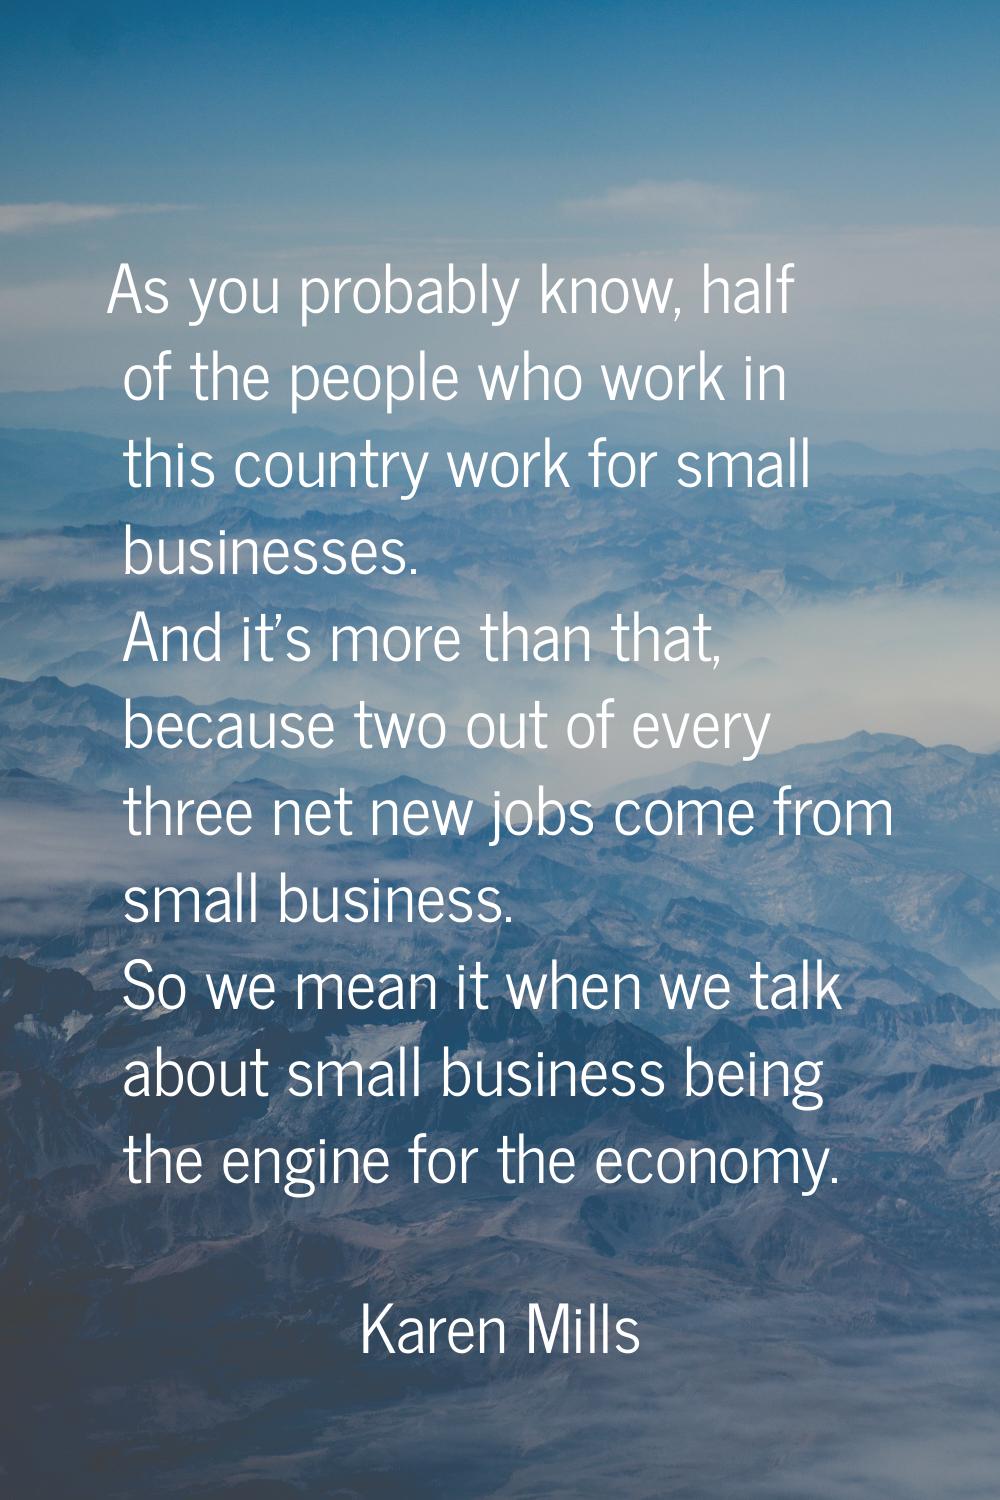 As you probably know, half of the people who work in this country work for small businesses. And it